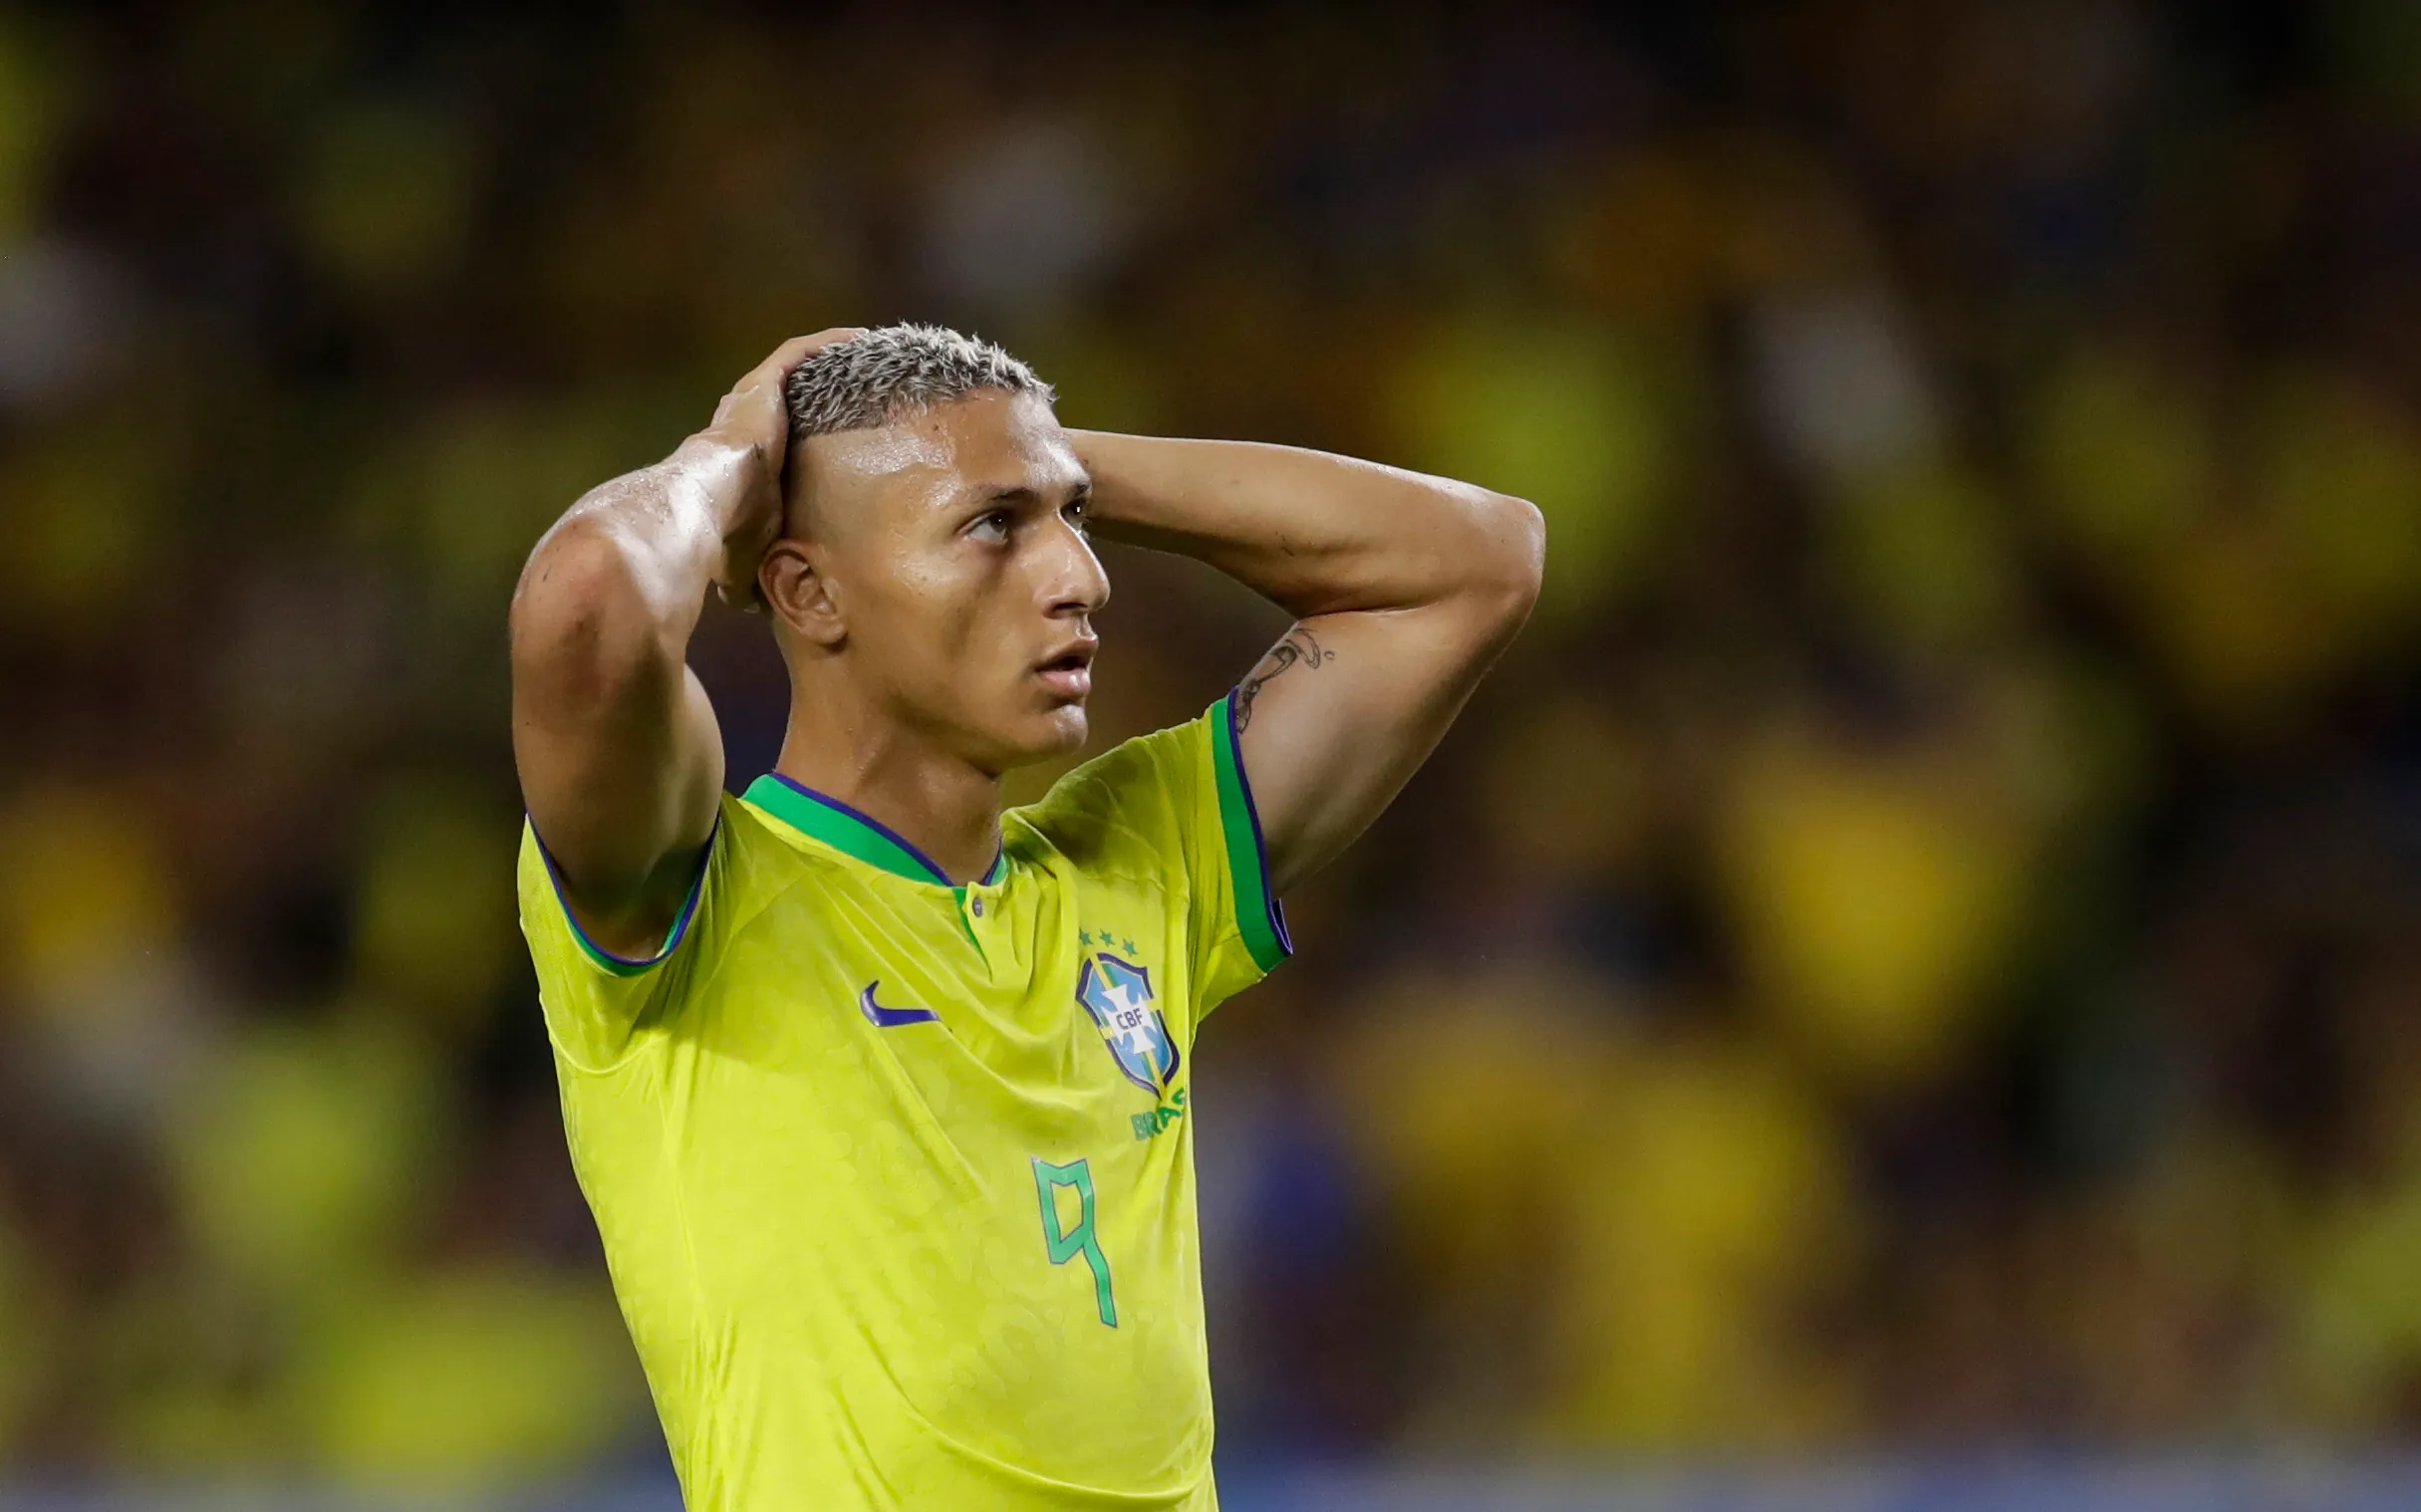 Richarlison, the Spurs striker, to seek psychological support following emotional distress caused by being substituted during a Brazil match.